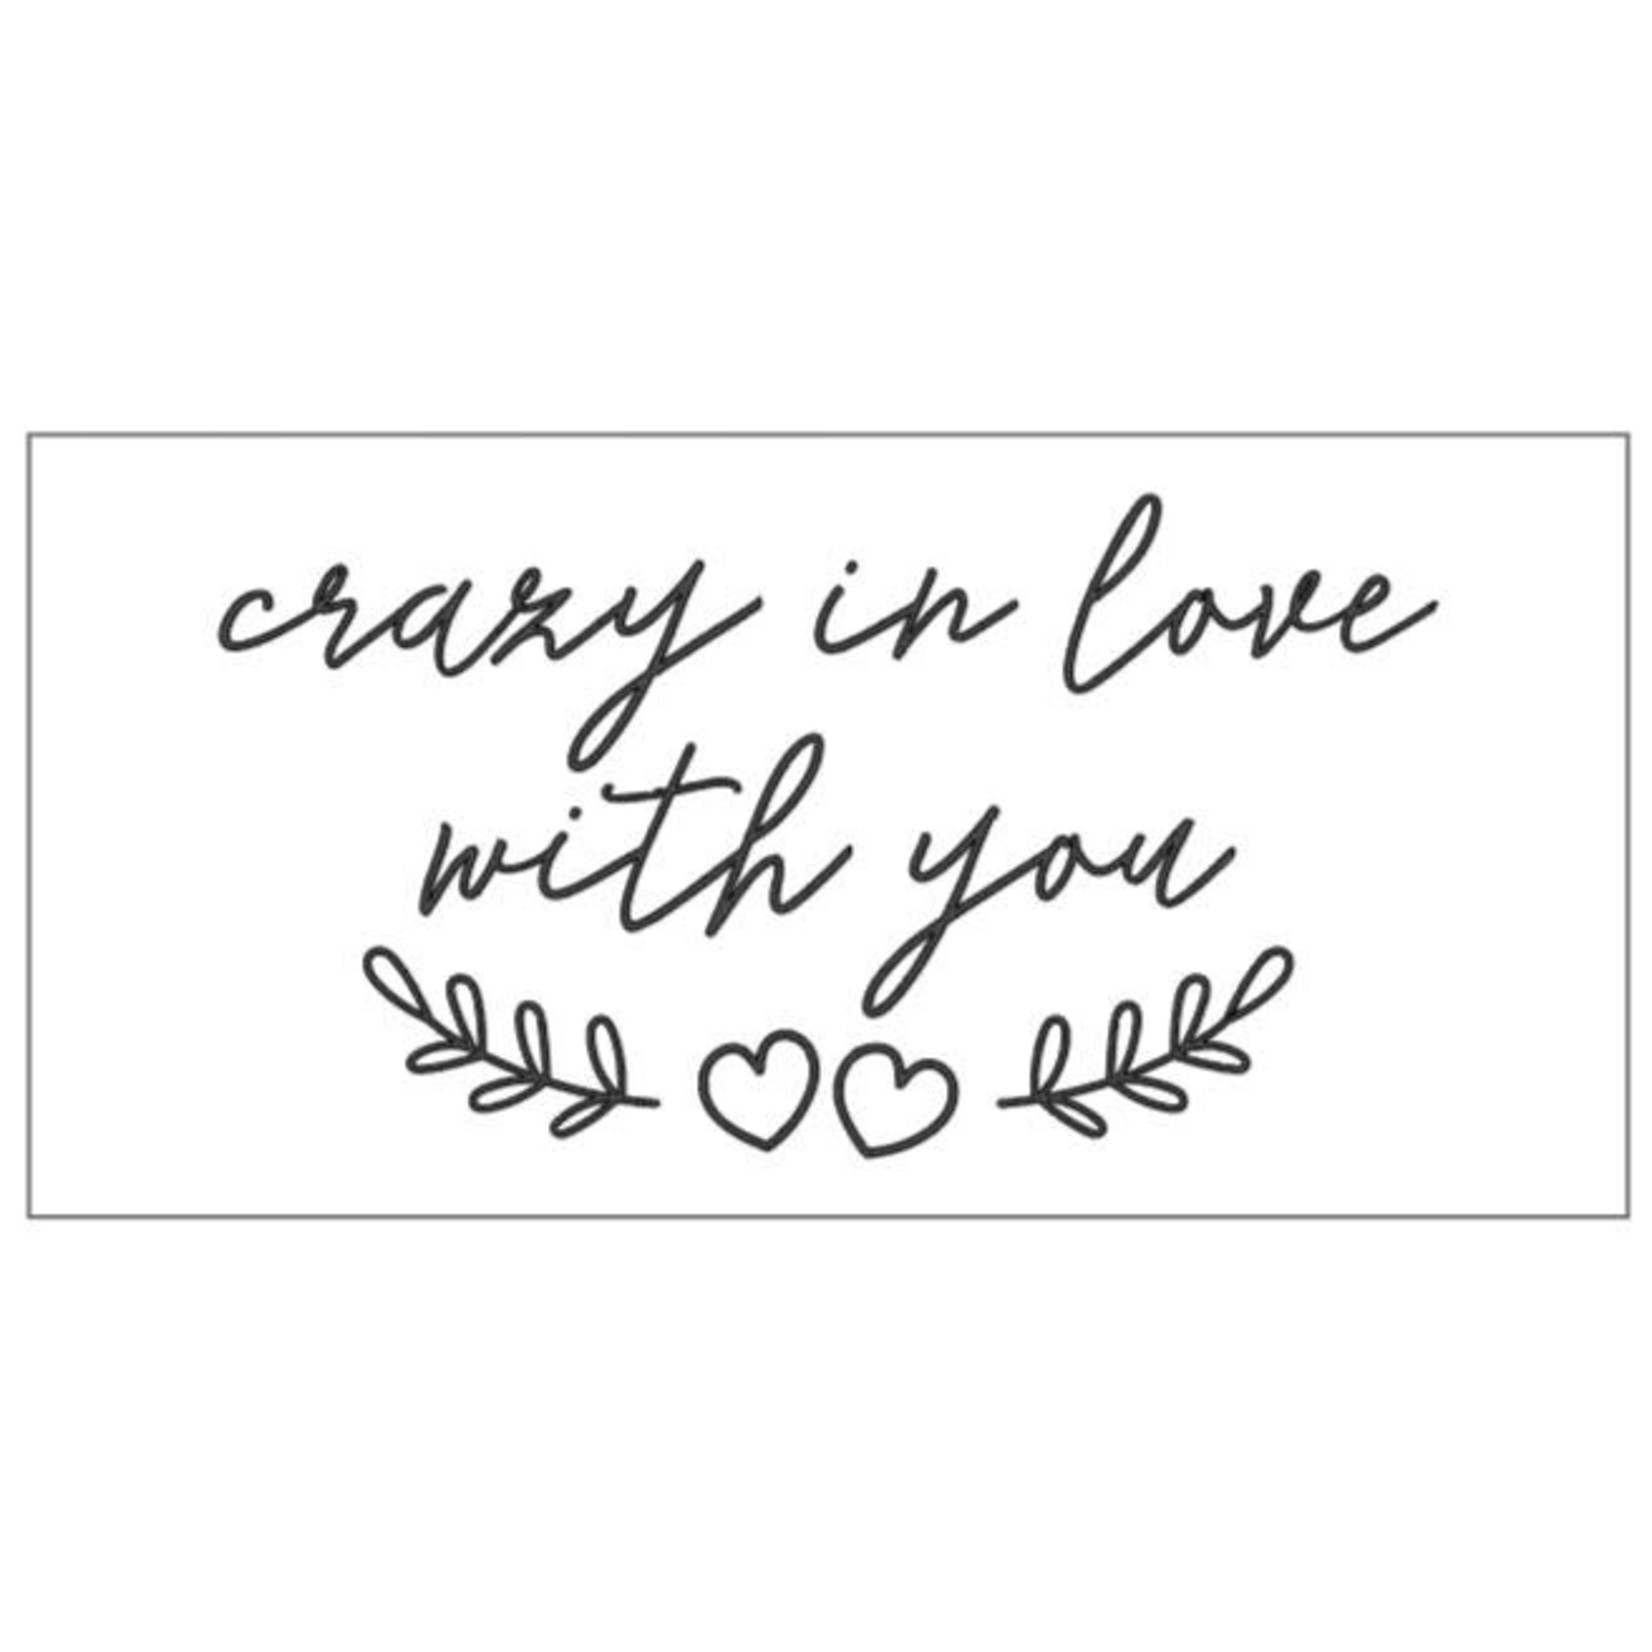 Crazy in Love with You 12x24